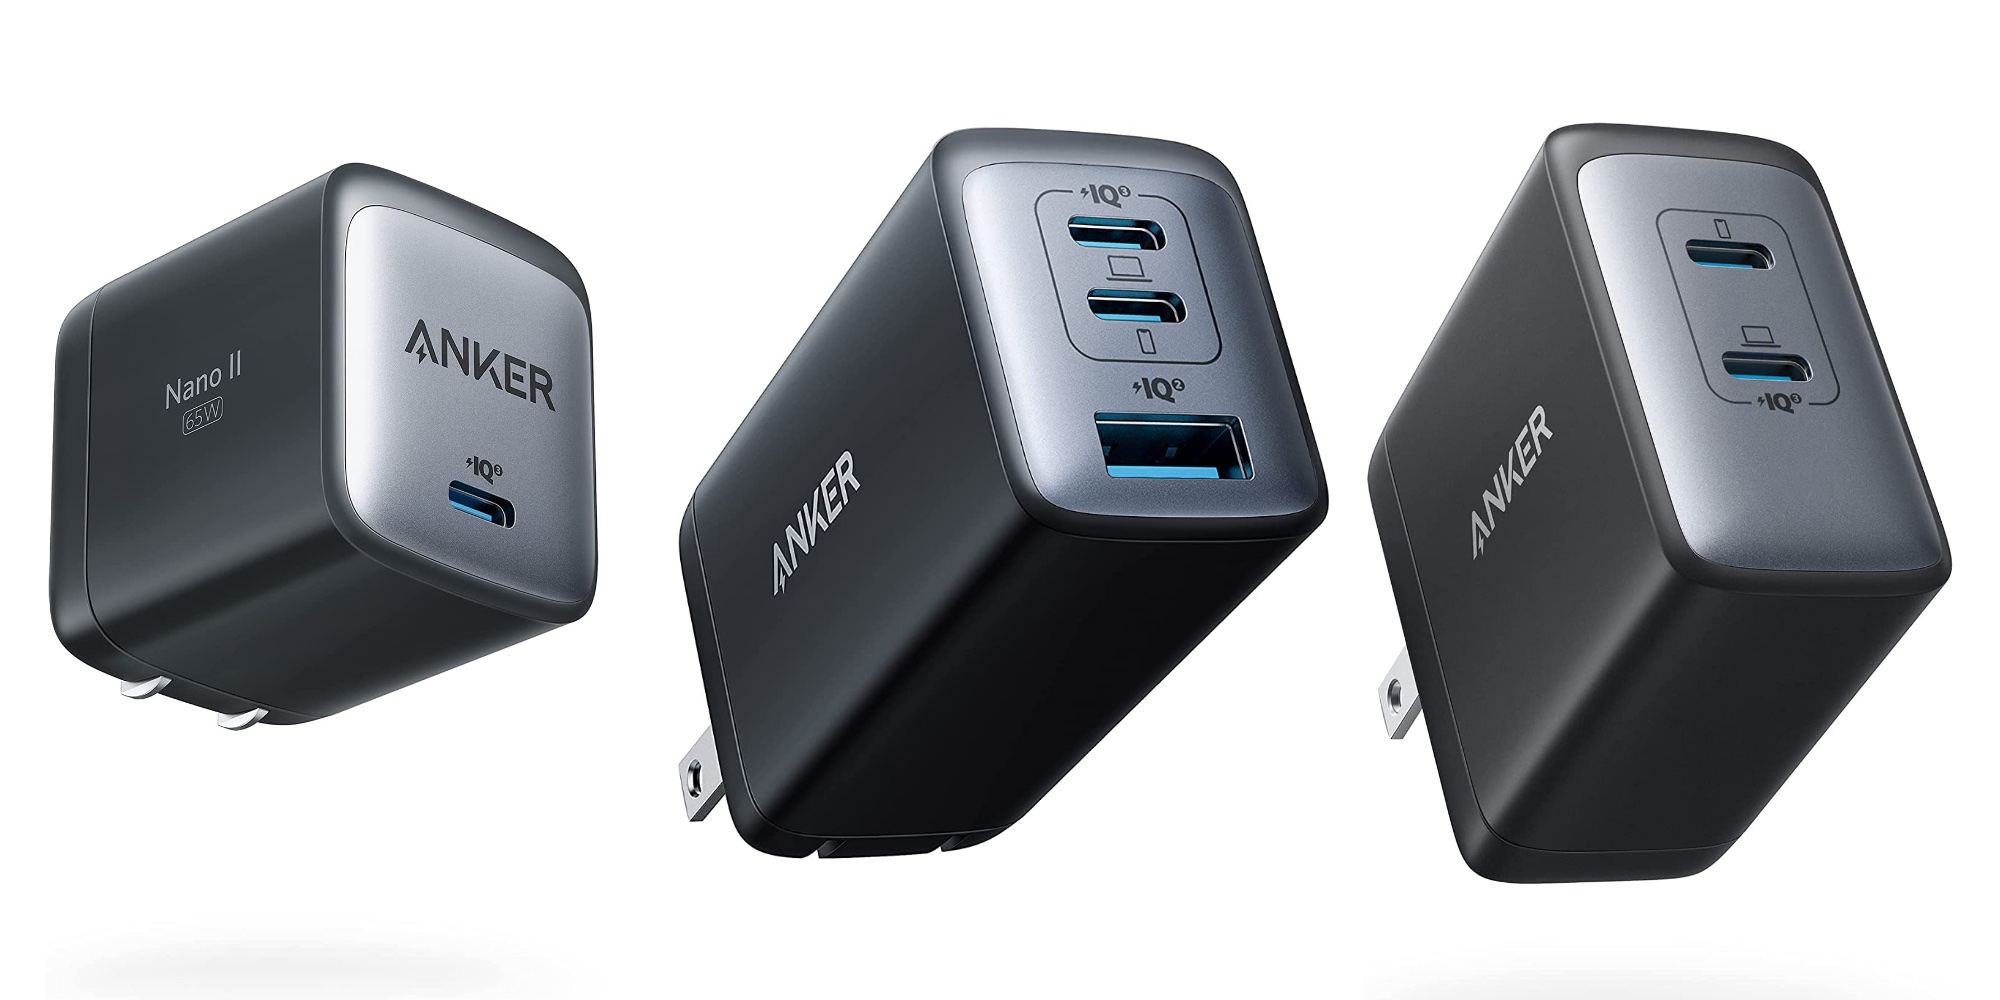 Anker's Nano II 100W USB-C GaN charger went on sale and sold out